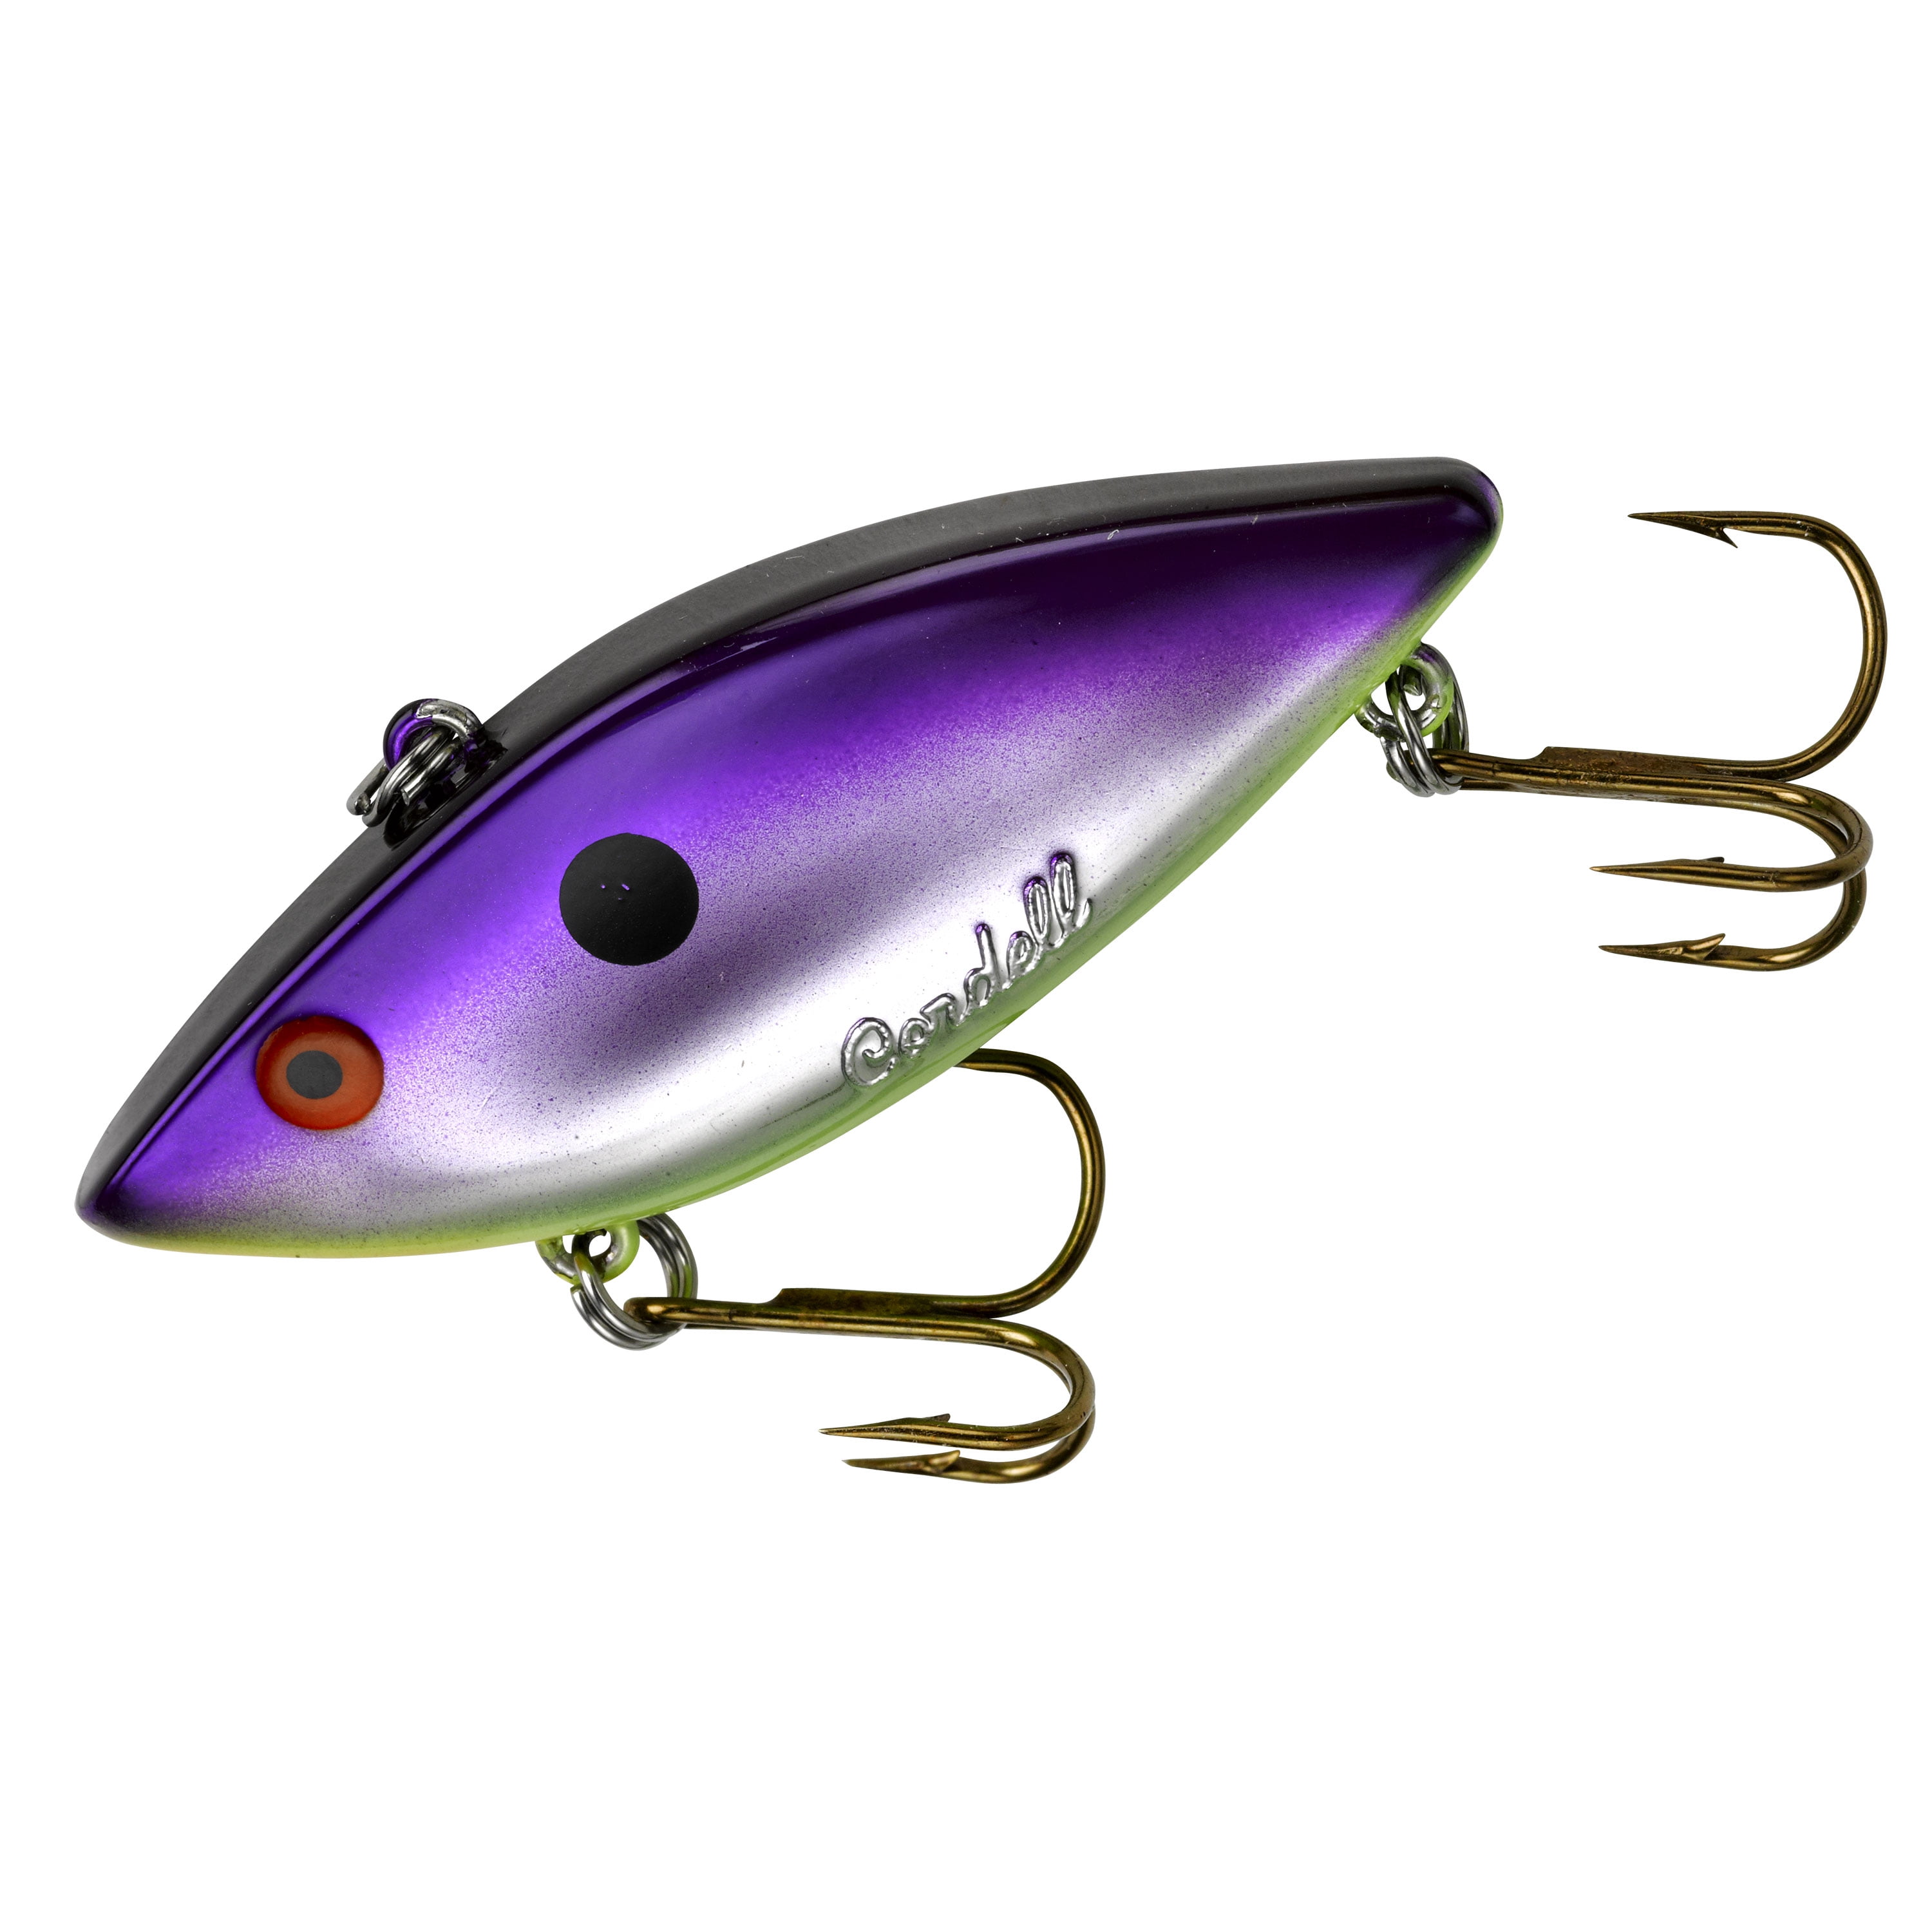 COTTON CORDELL GRAPPLER SHAD IN SUPER SHAD COLOR CD15406 AS SHOWN IN PICTURE 